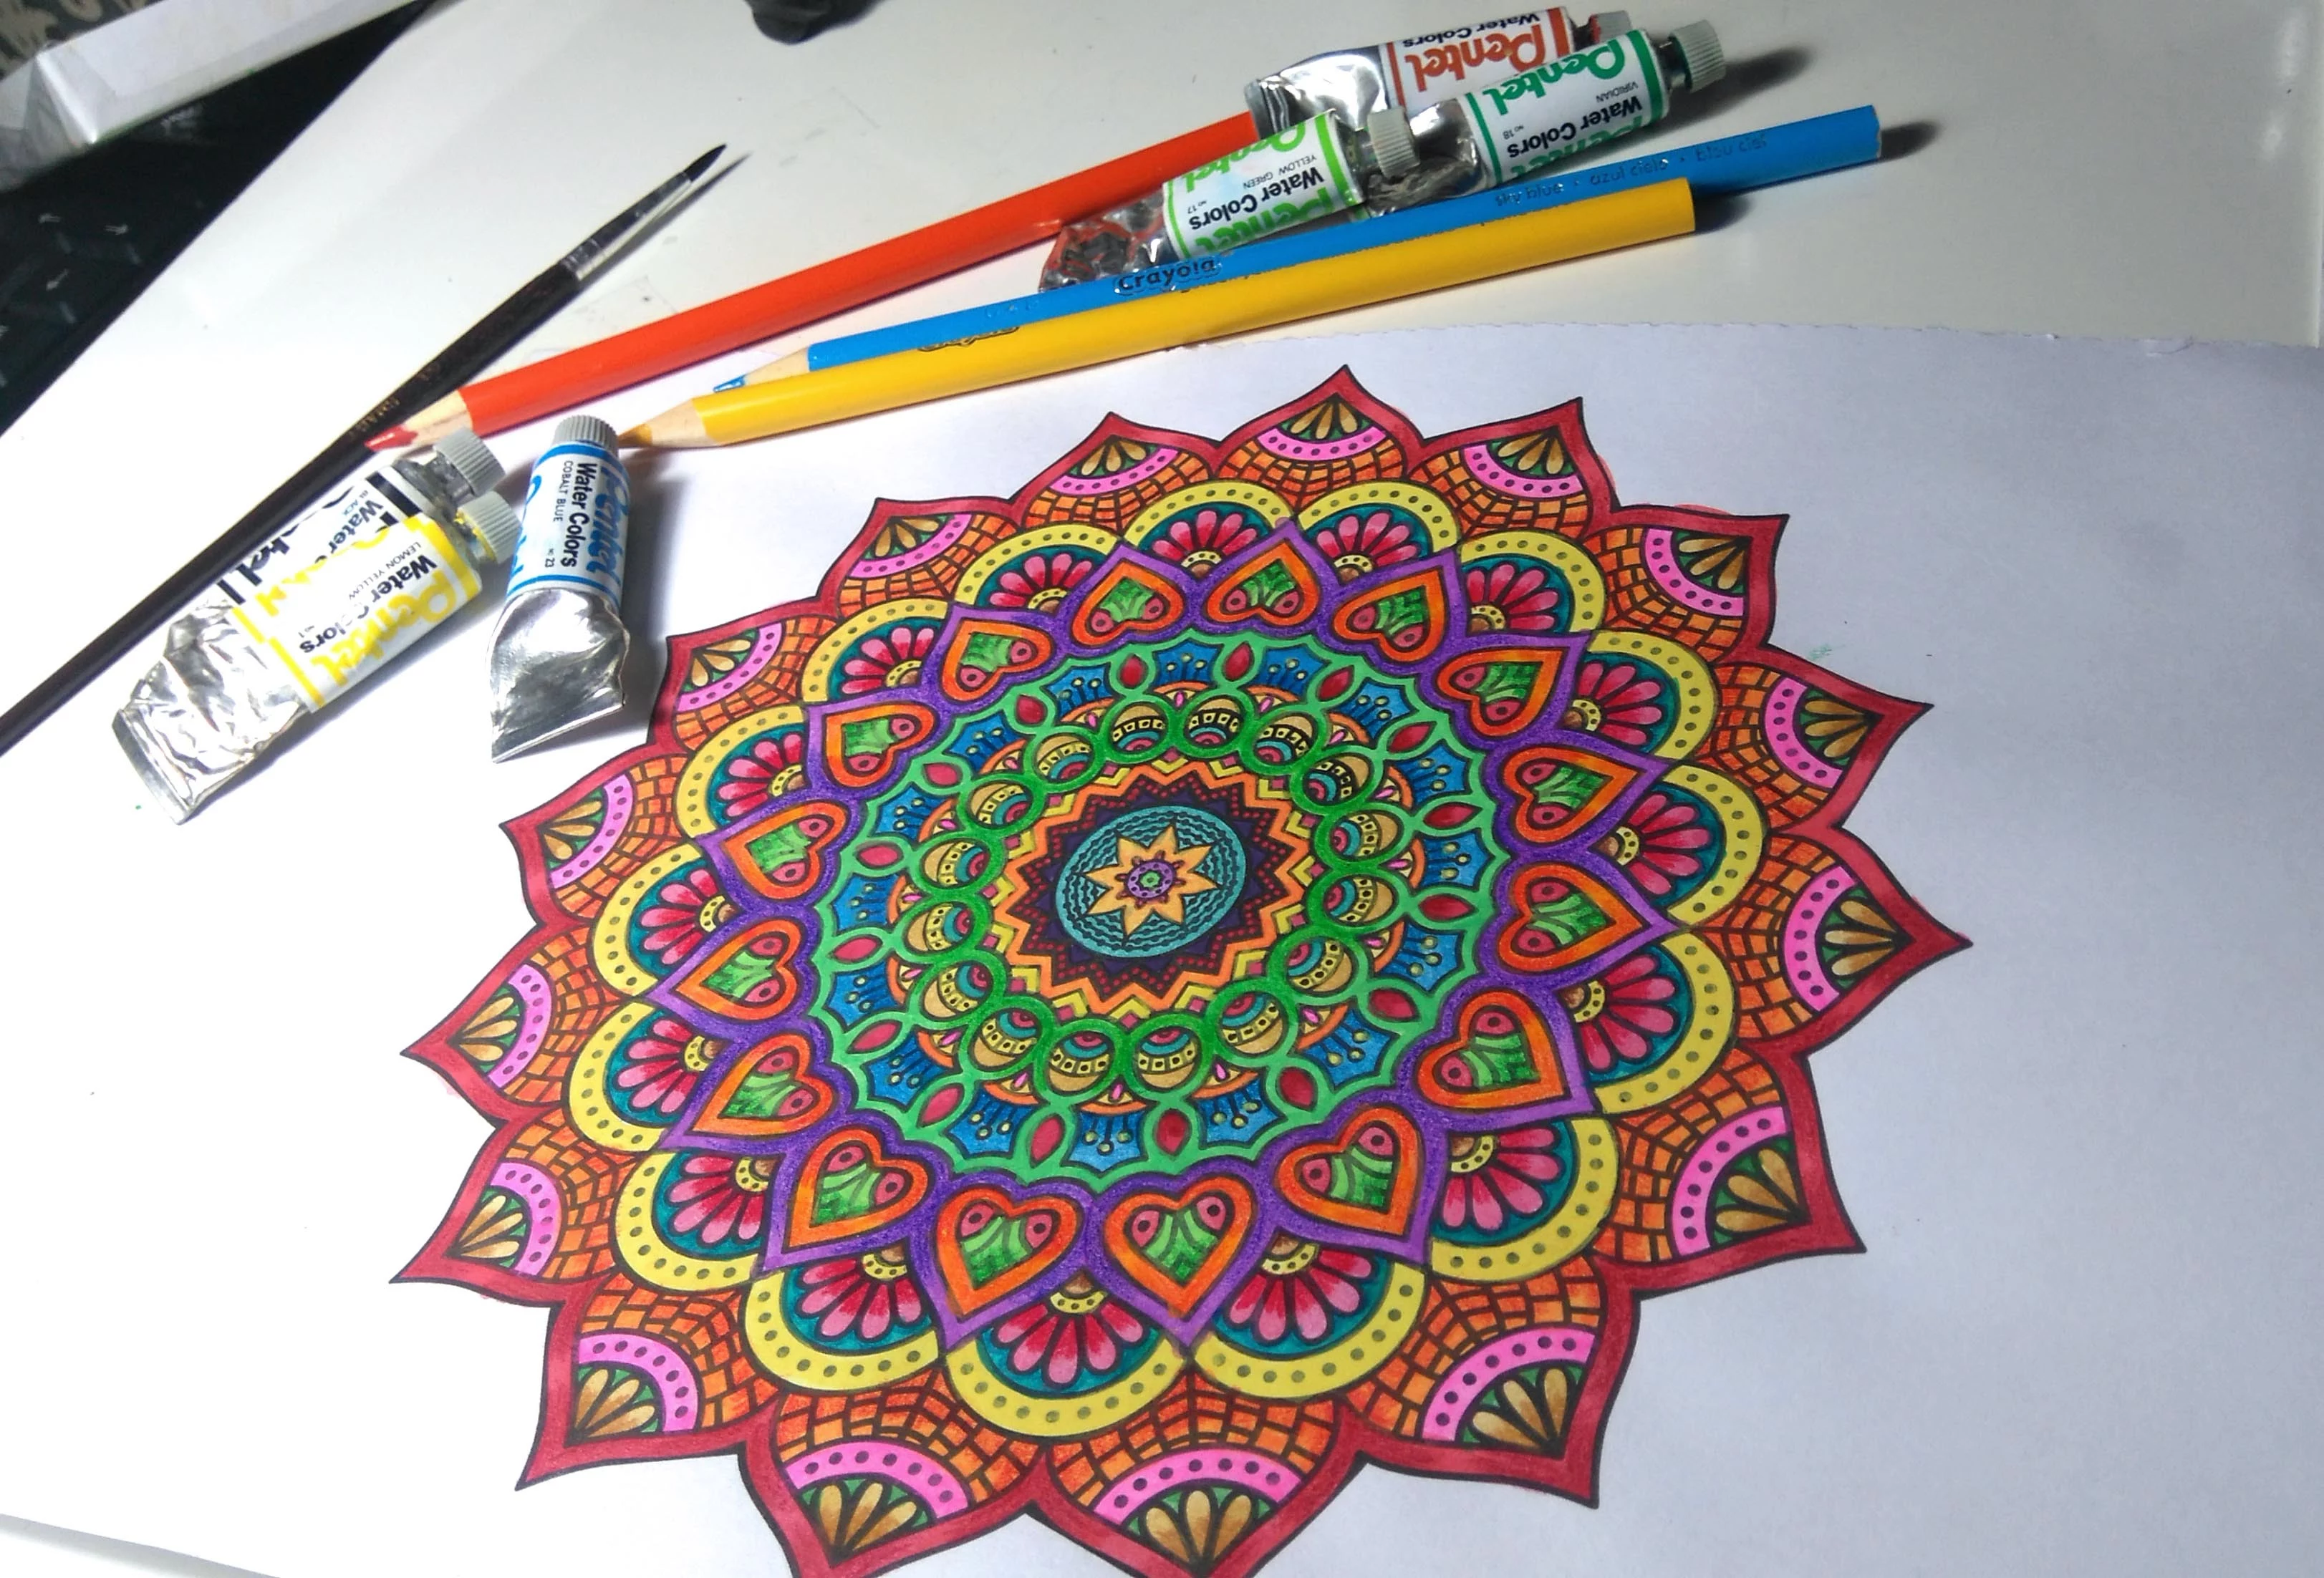 flower mandala in yellow, orange and red, pink and blue, craft ideas, colored pencils and tubs of paint in background